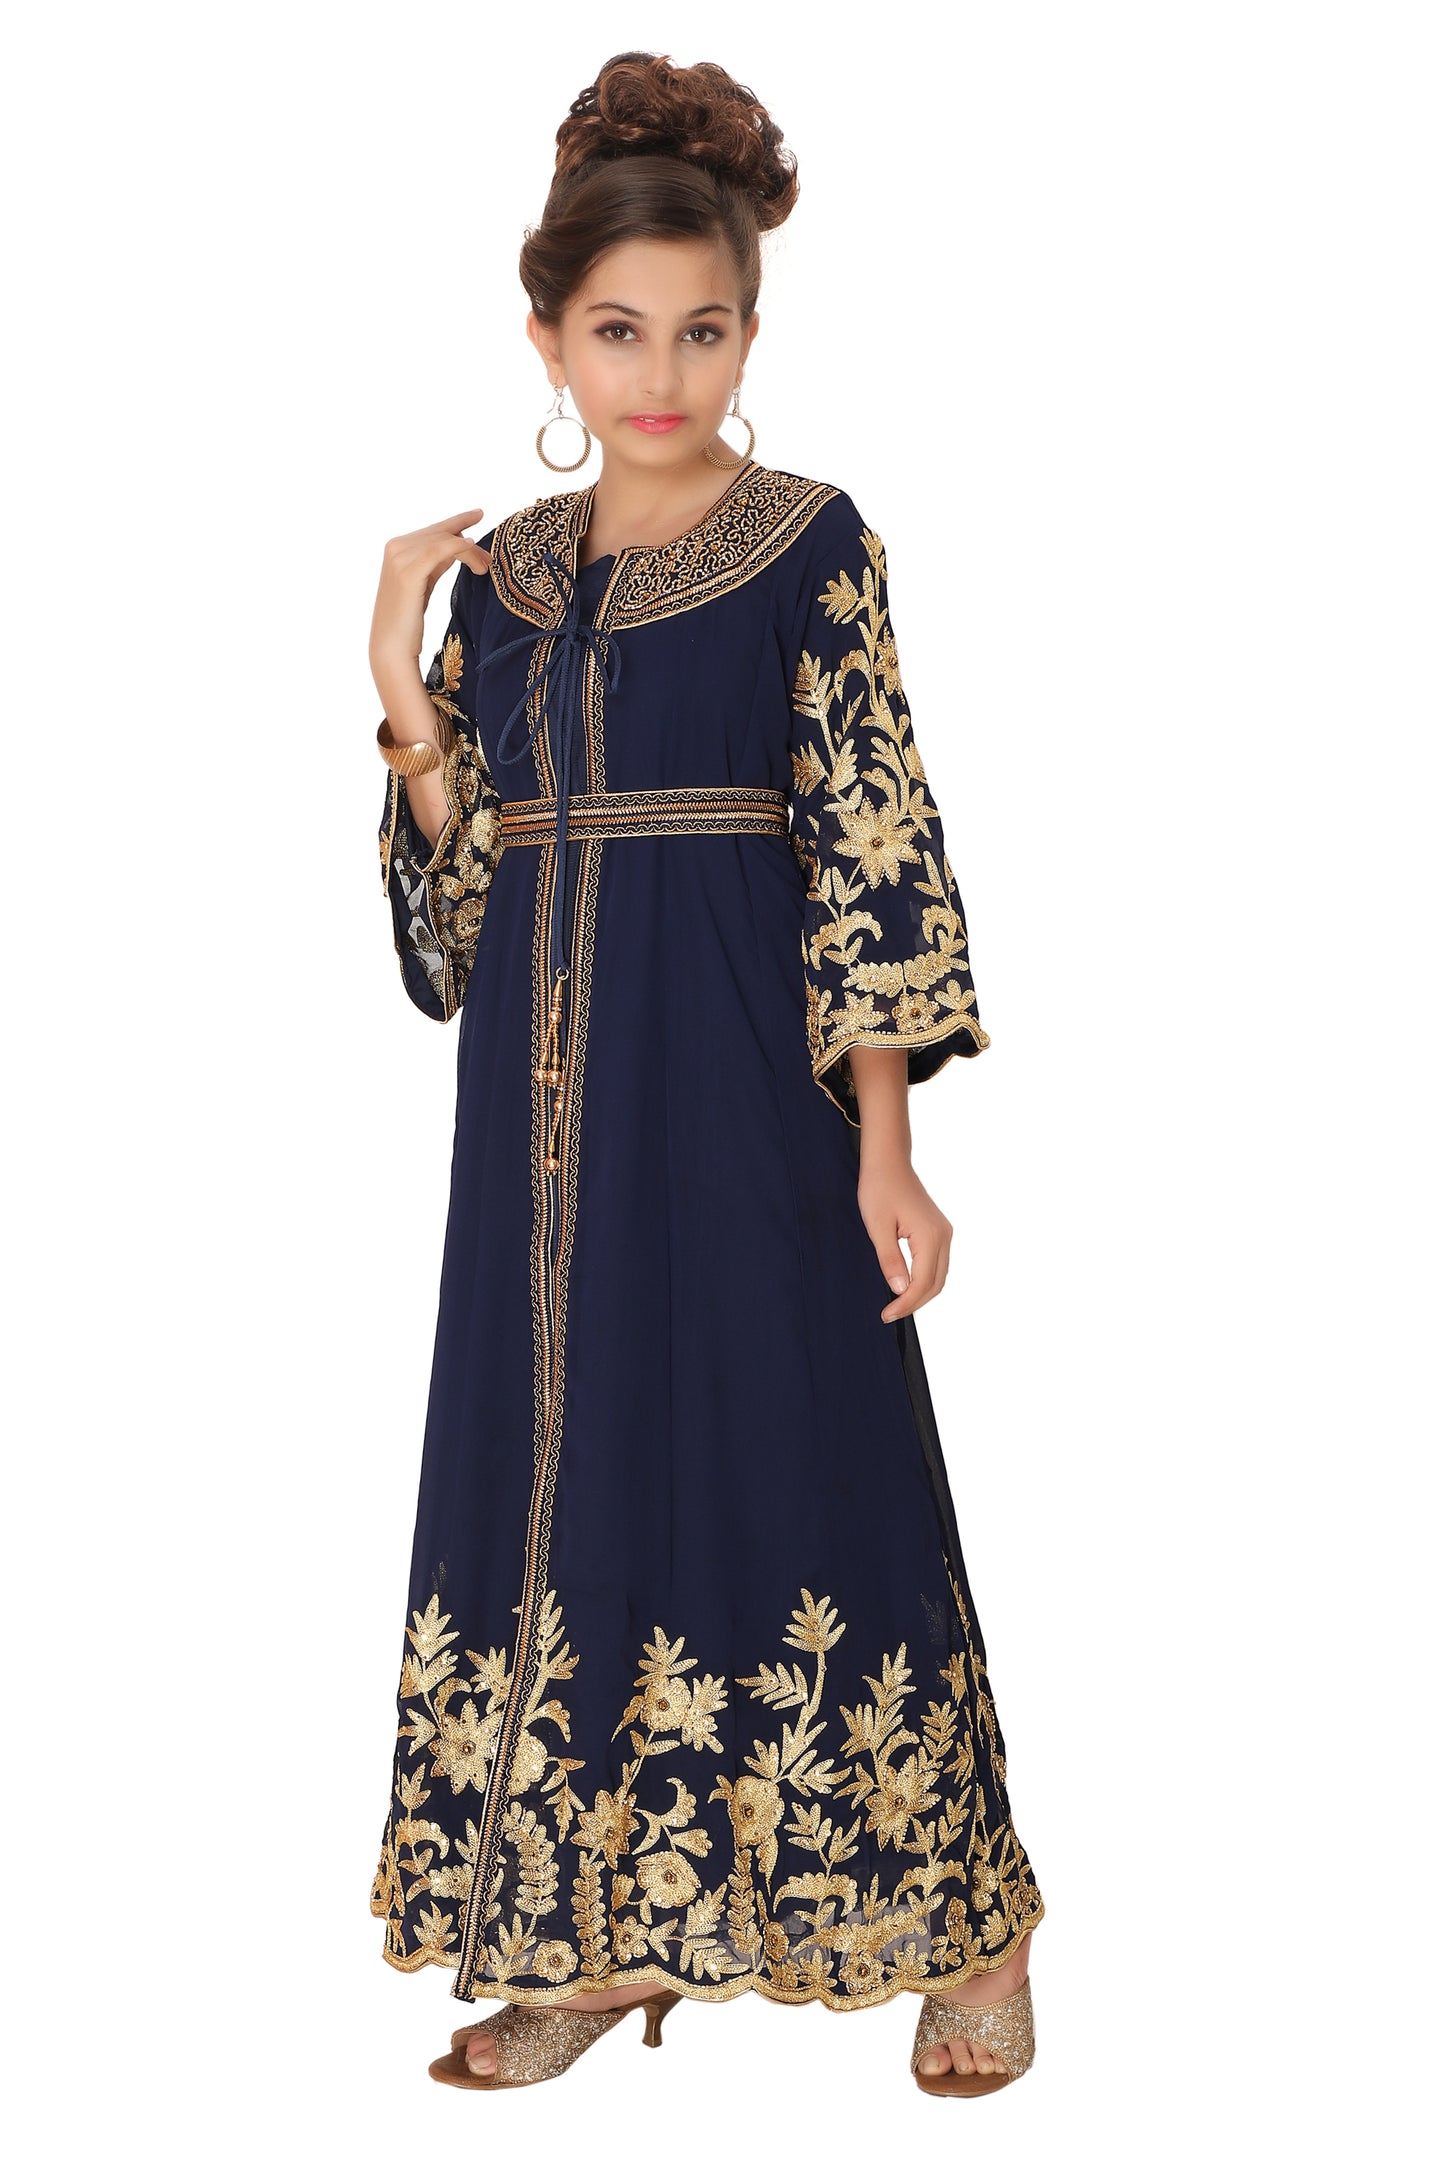 Load image into Gallery viewer, Designer Arabian Kaftan Golden Embroidered Party Dress - Maxim Creation
